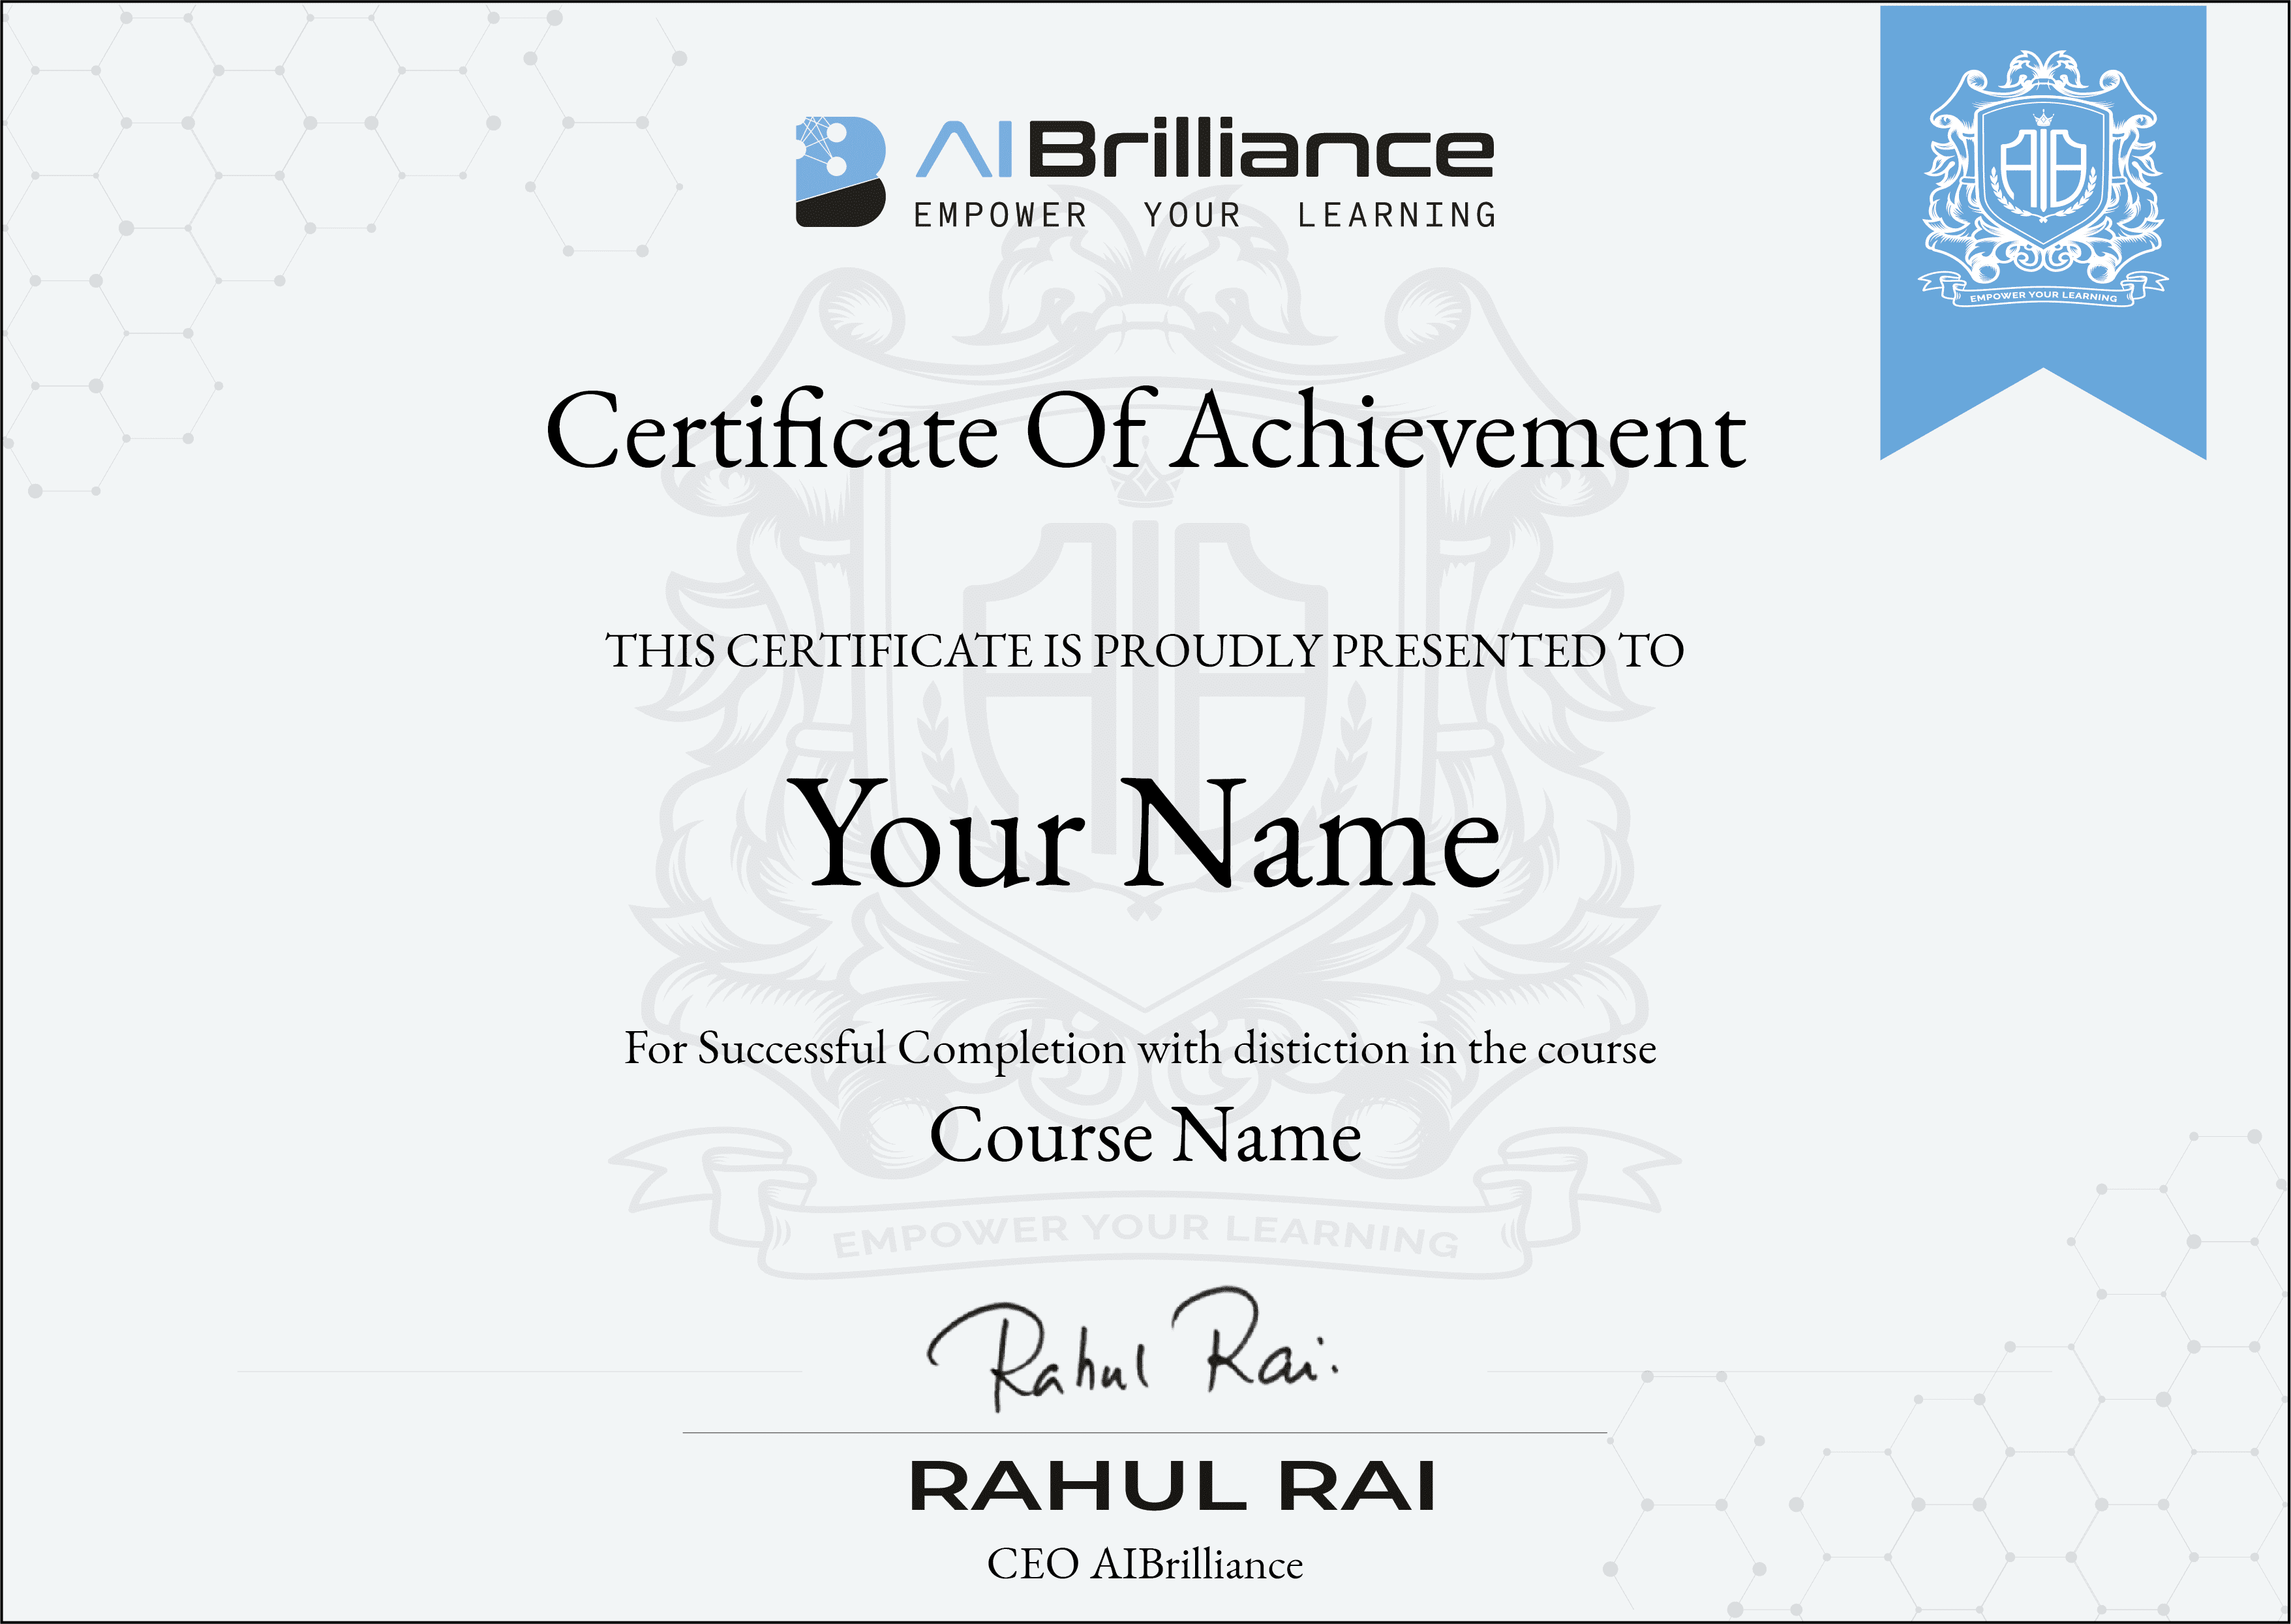  AIB Certificate data science machine learning artificial intelligence